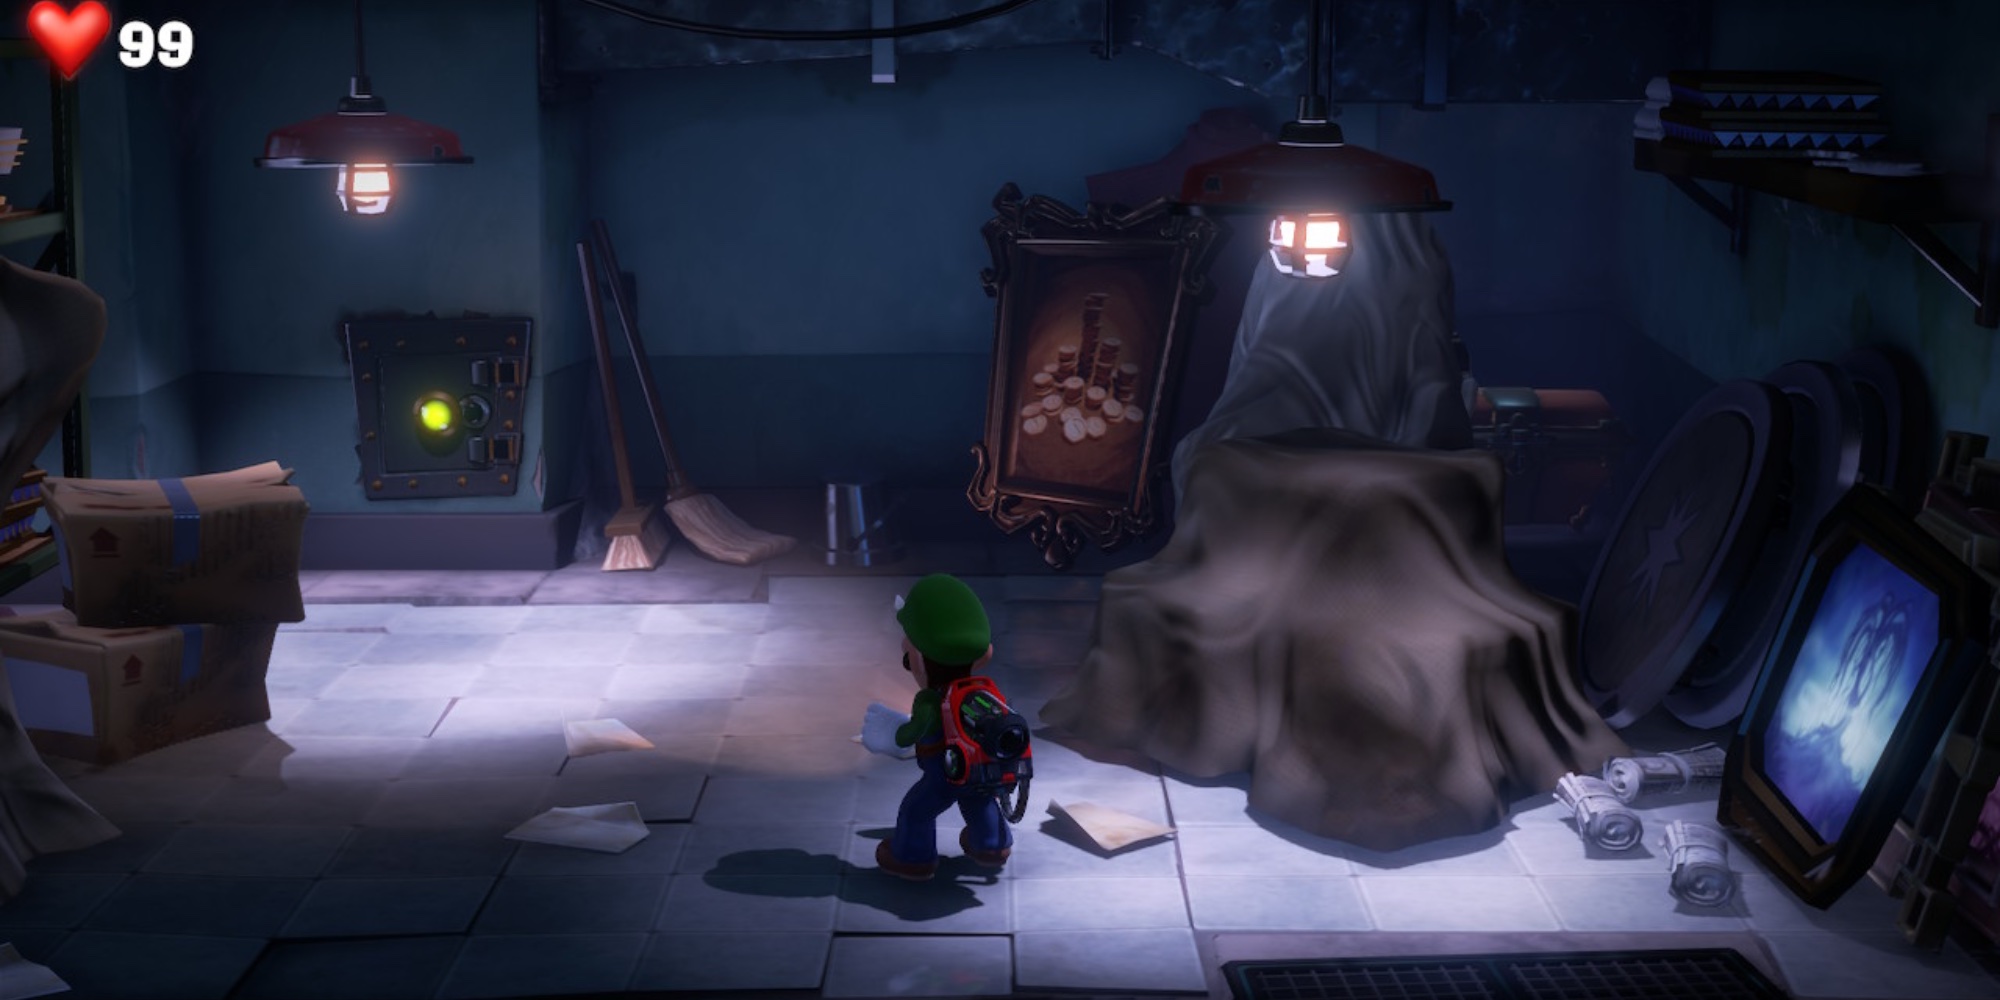 luigi-s-mansion-3-review-satisfying-combat-shines-and-more-9to5toys